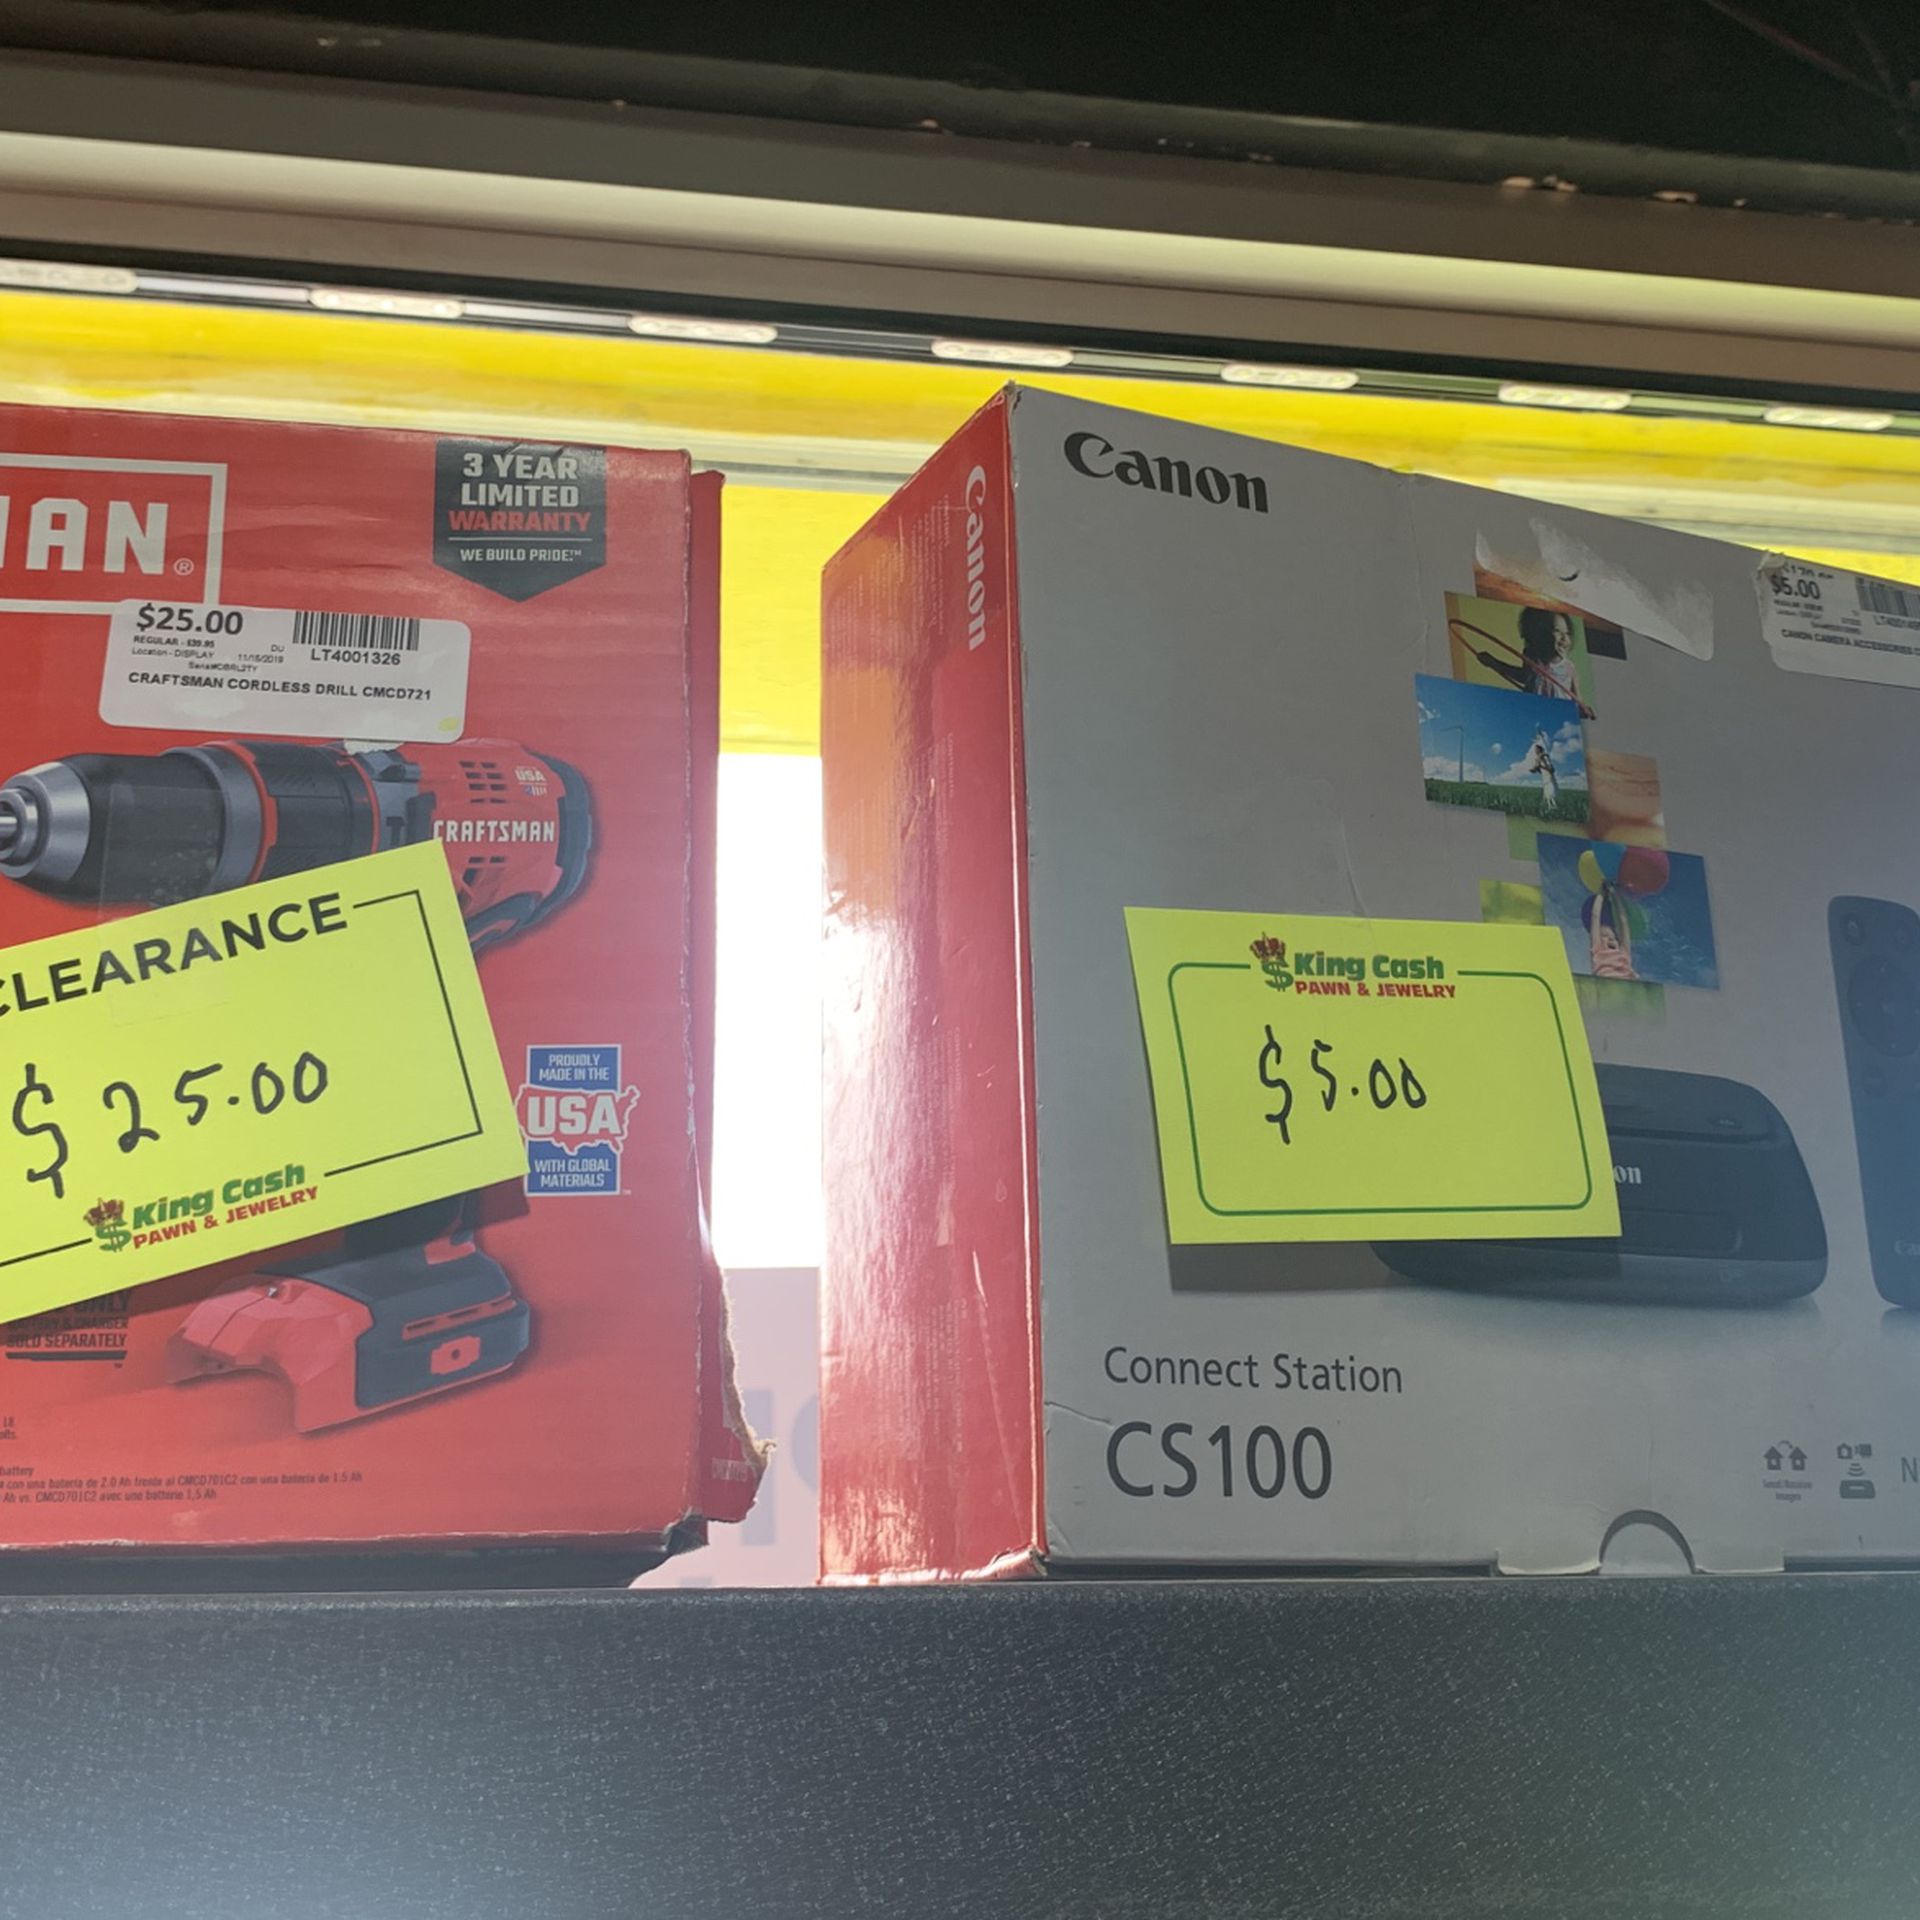 Clearance Tools for Sale in North Miami, FL - OfferUp